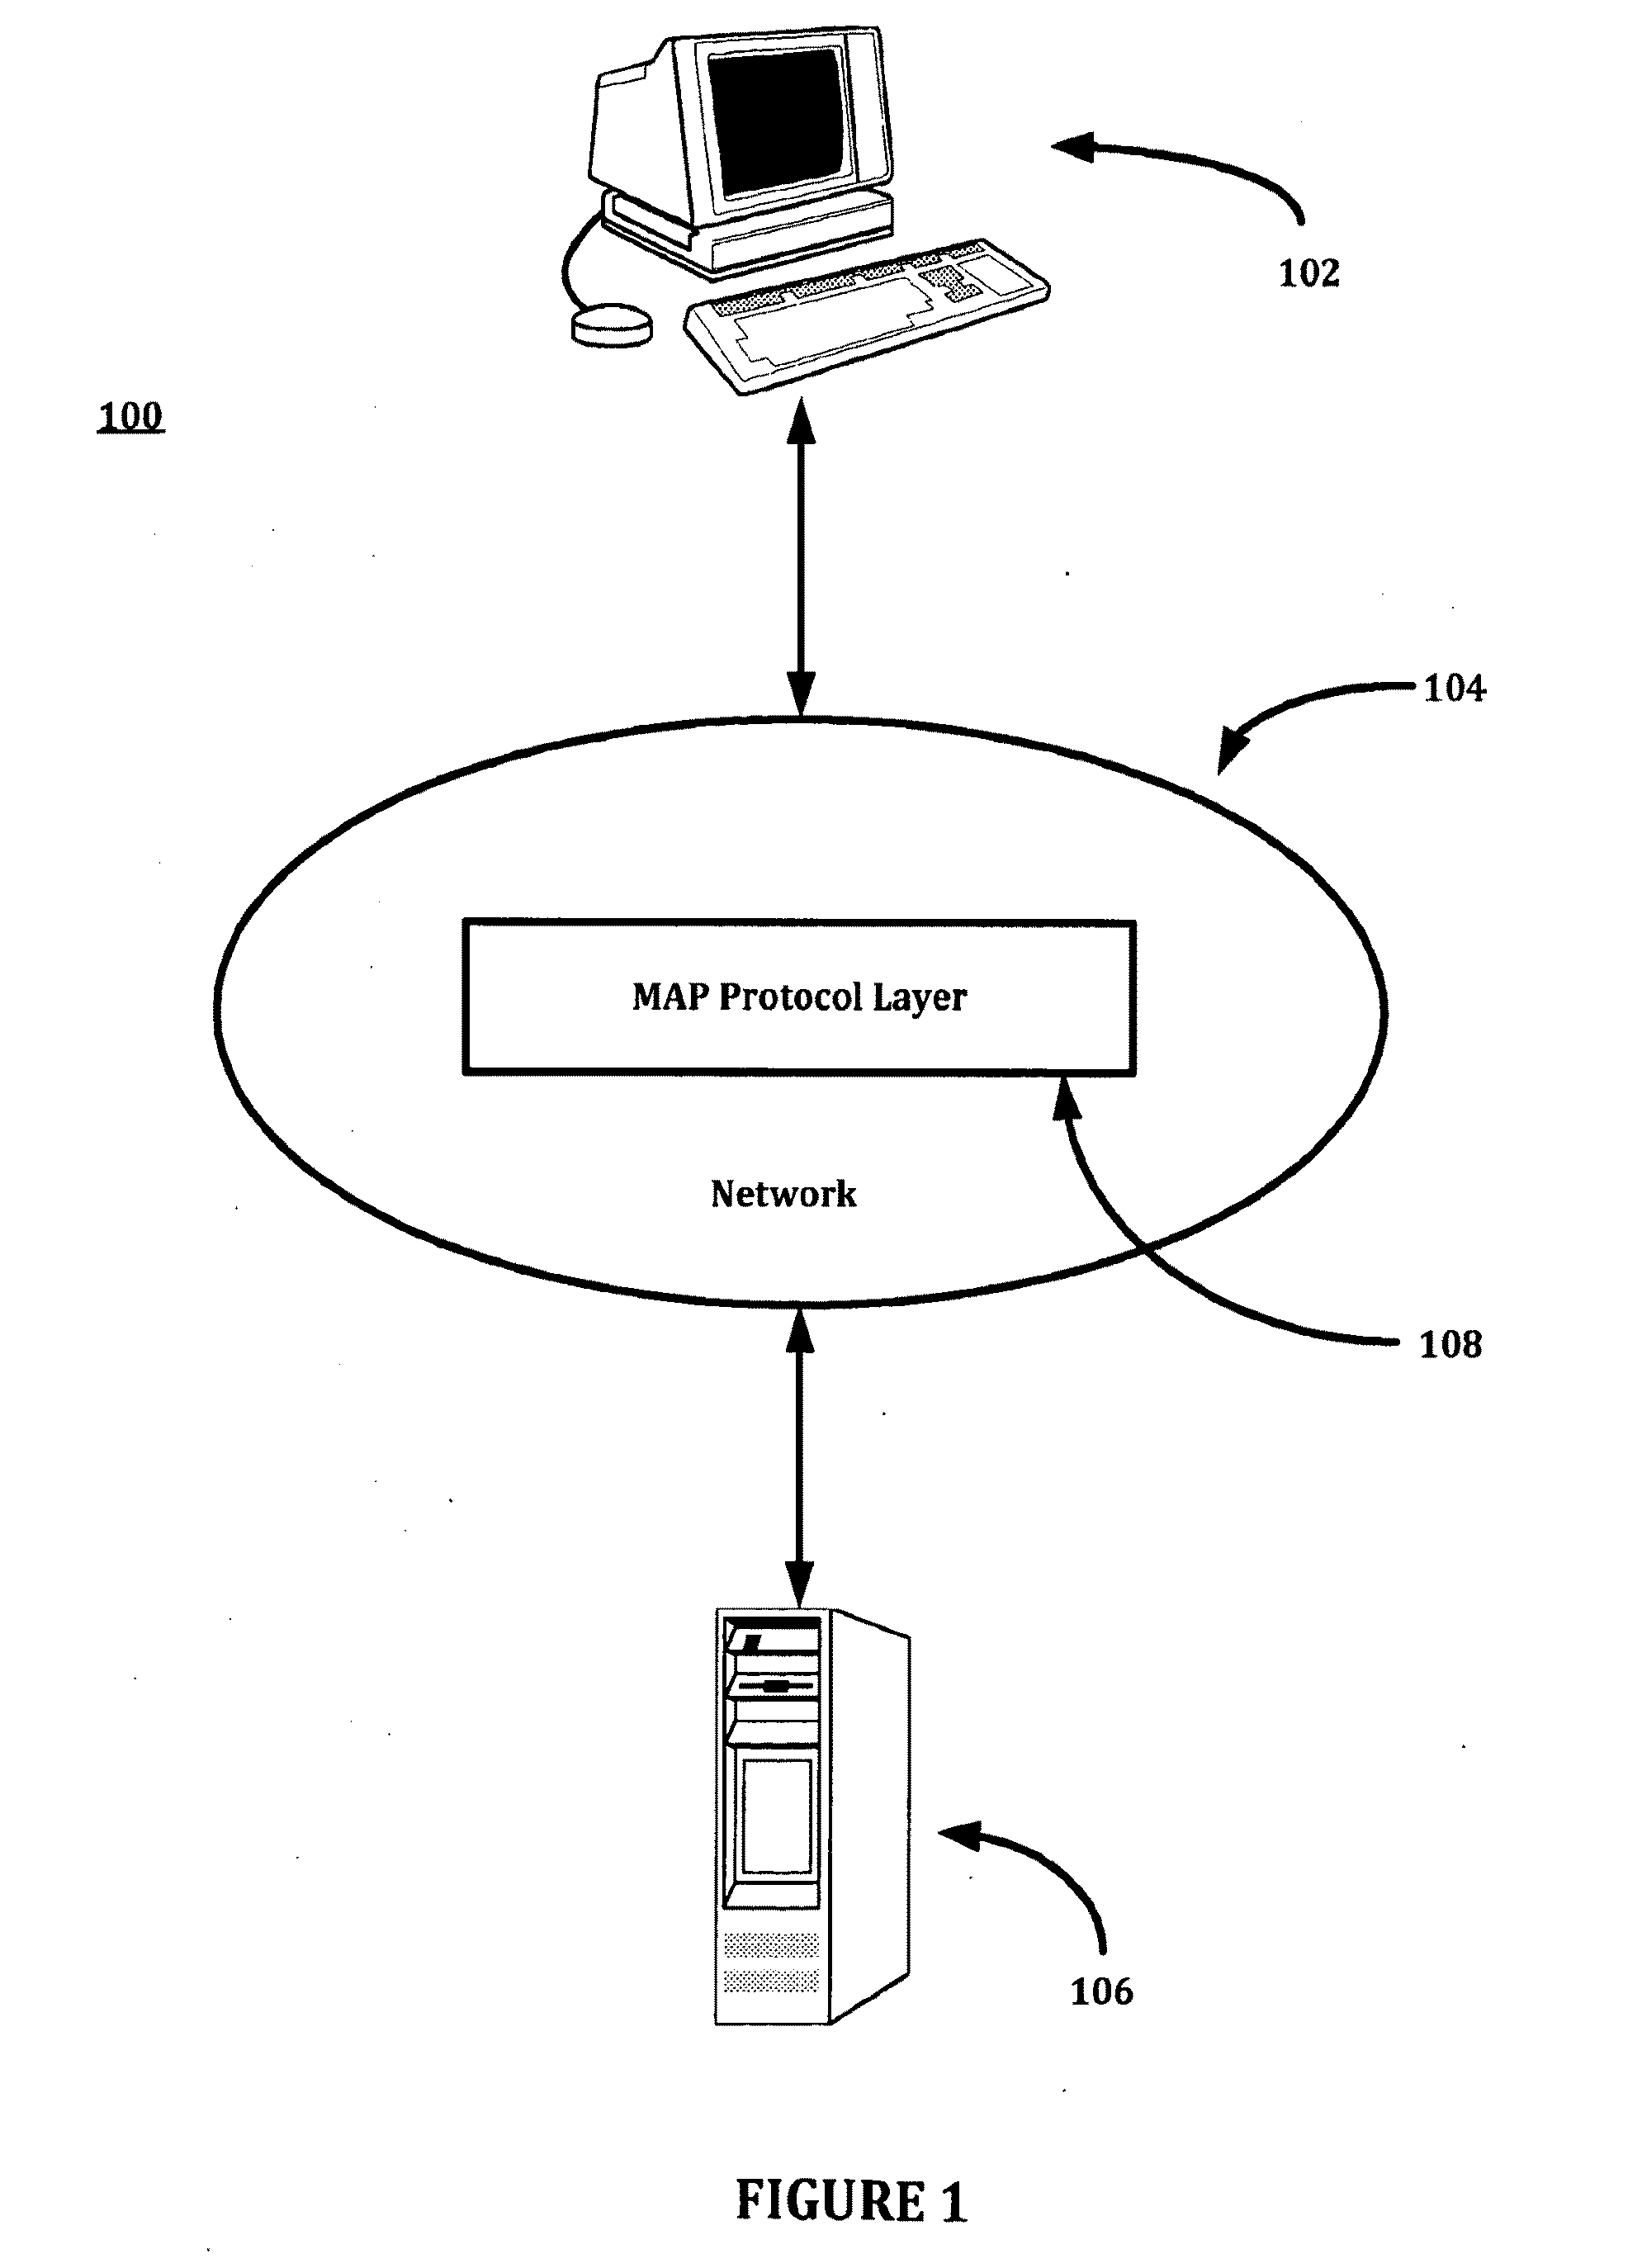 Method for authenticating a communication channel between a client and a server